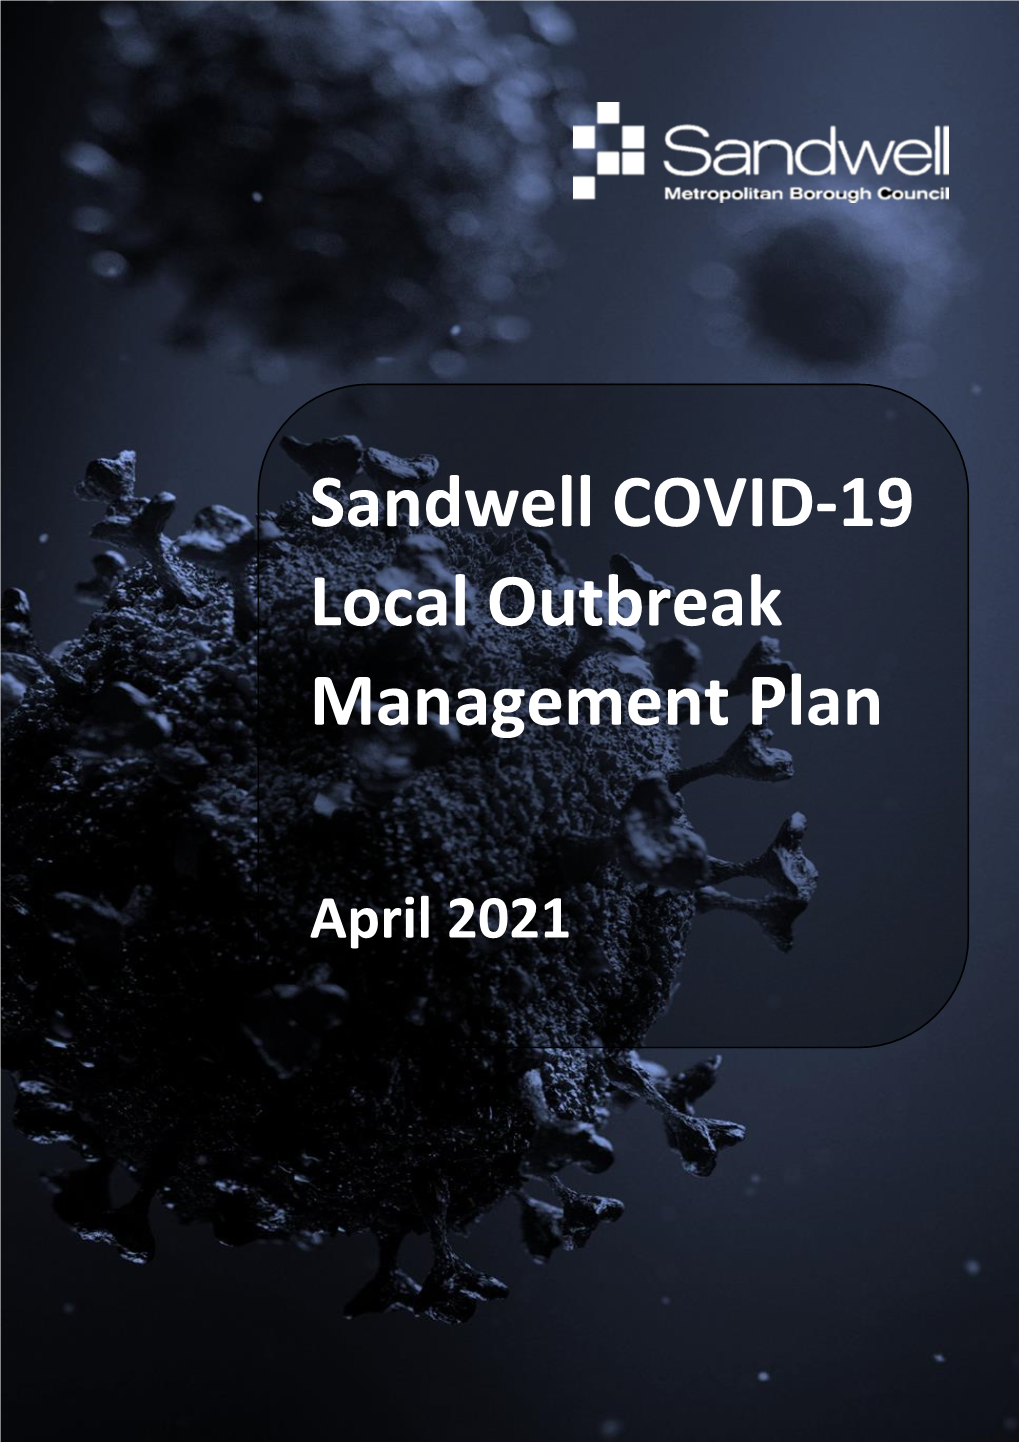 Sandwell COVID-19 Local Outbreak Management Plan